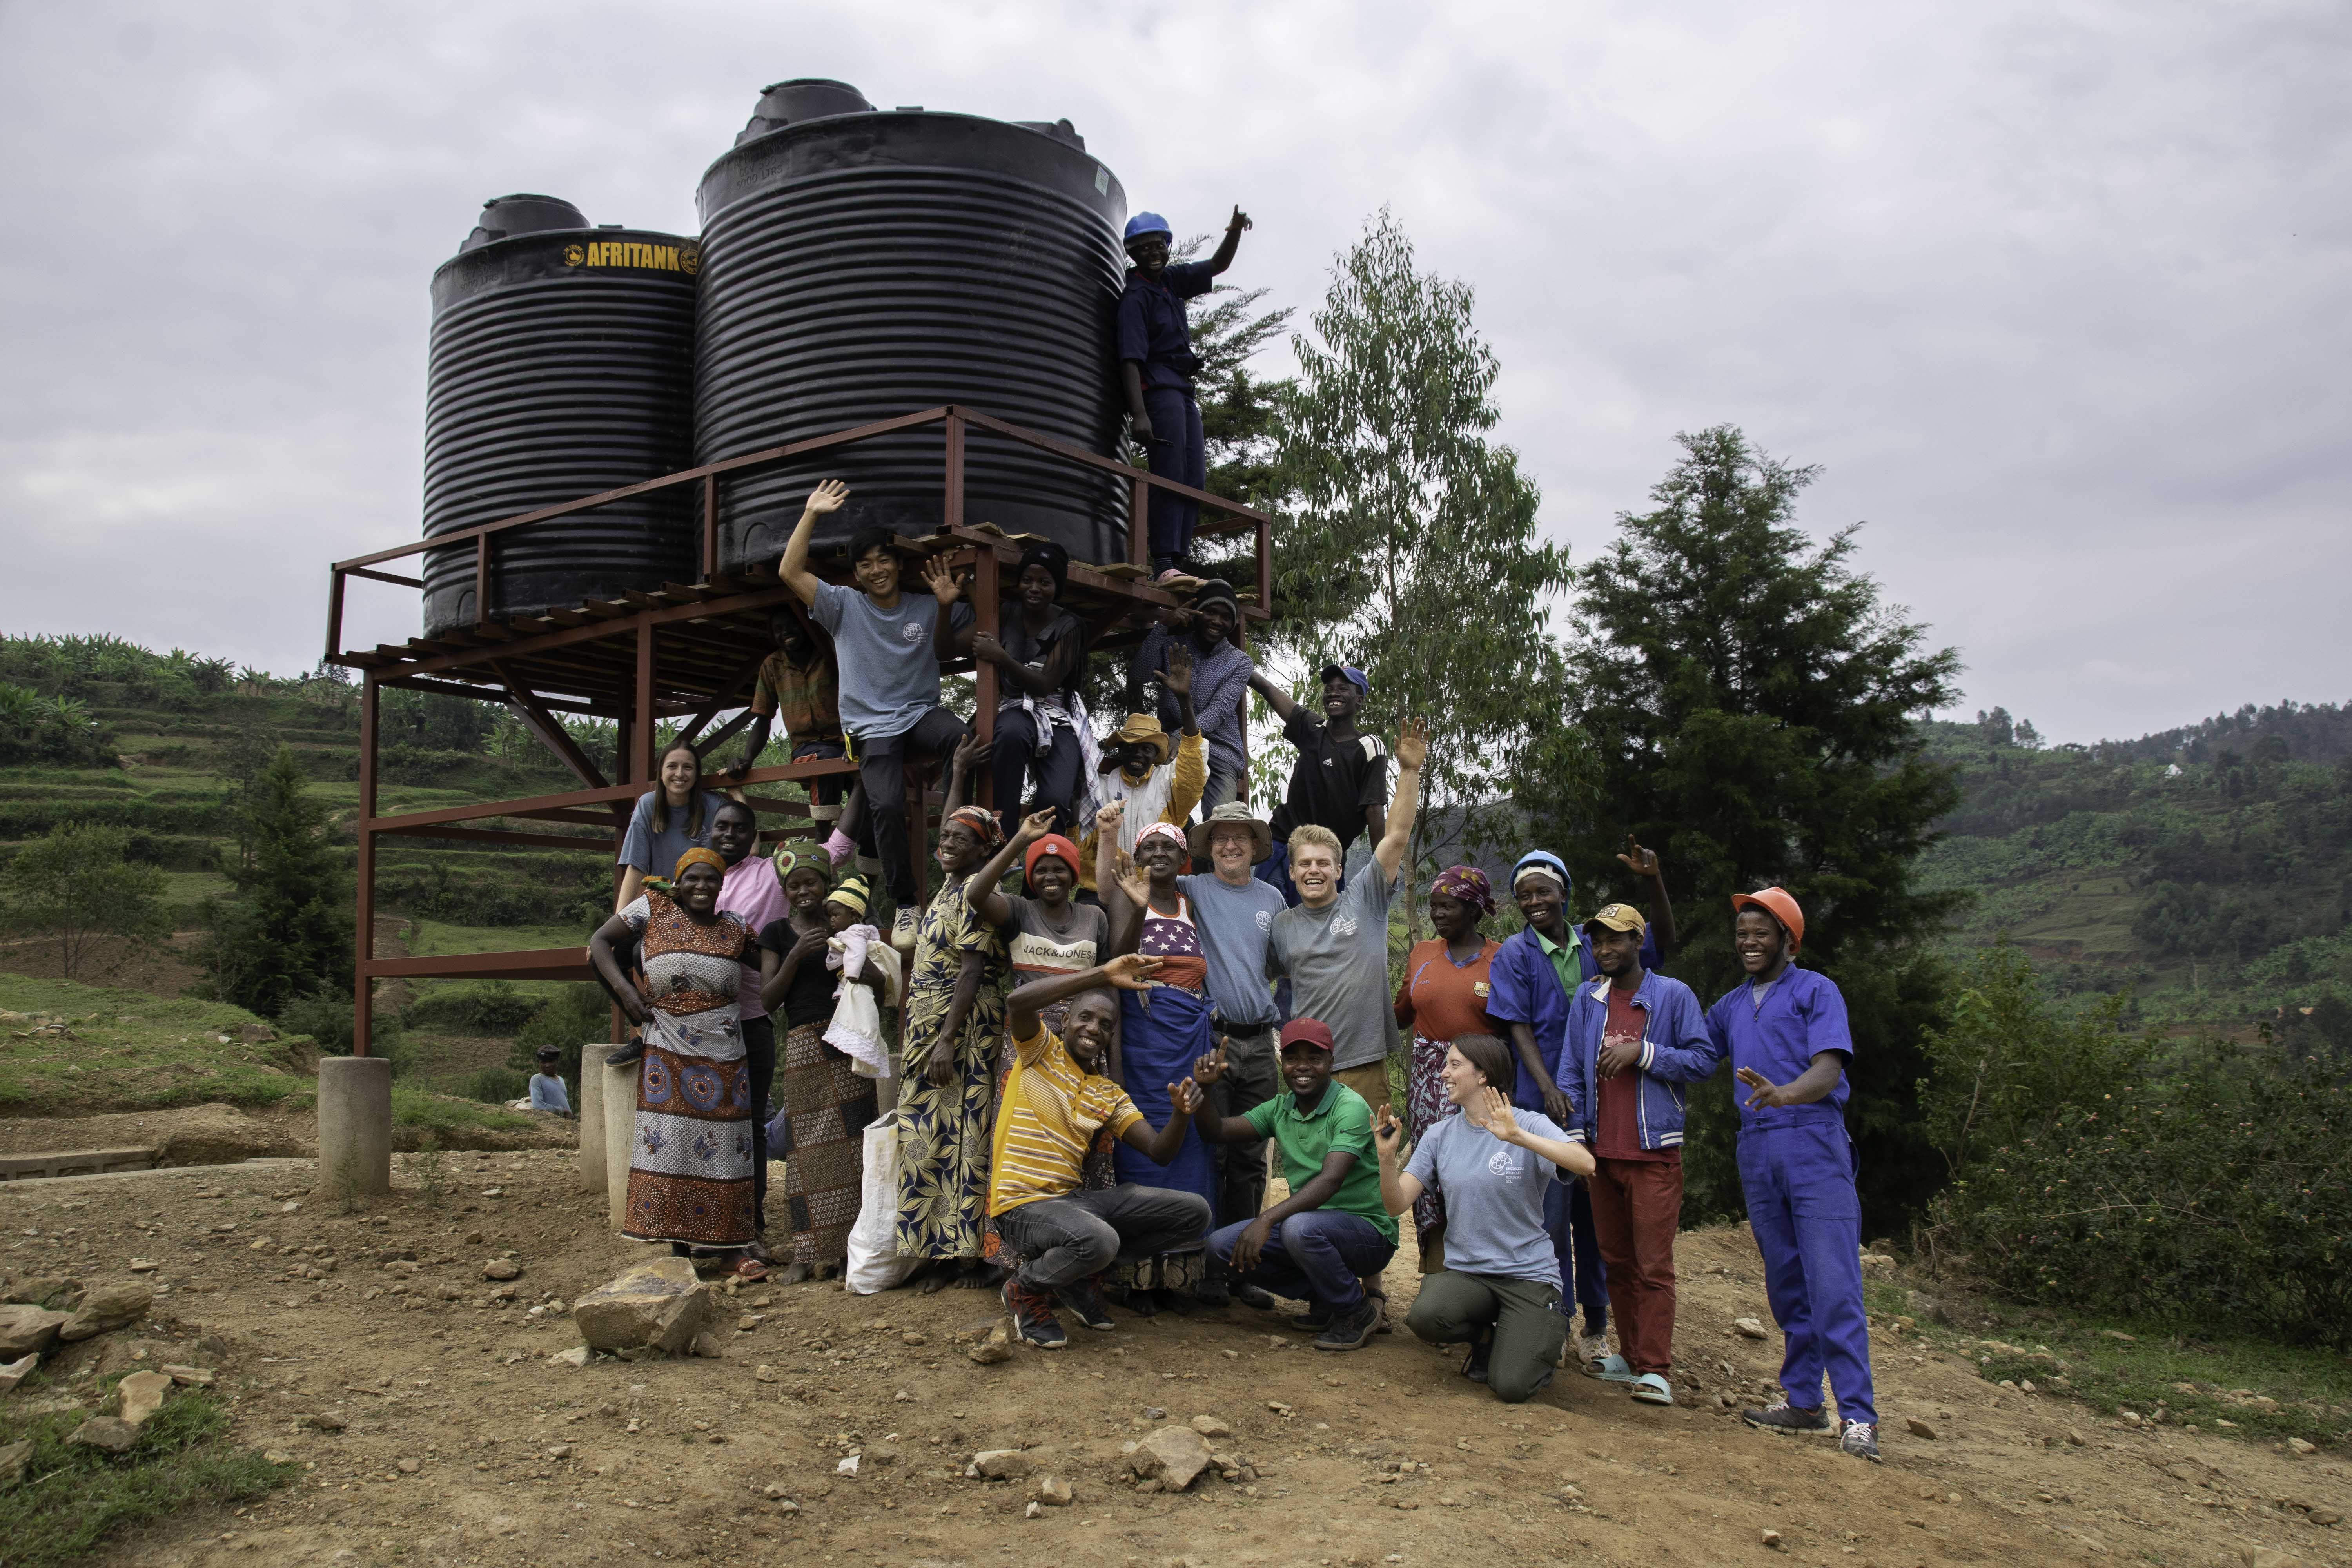 EWB traveled to Rwanda to implement a water filtration system.